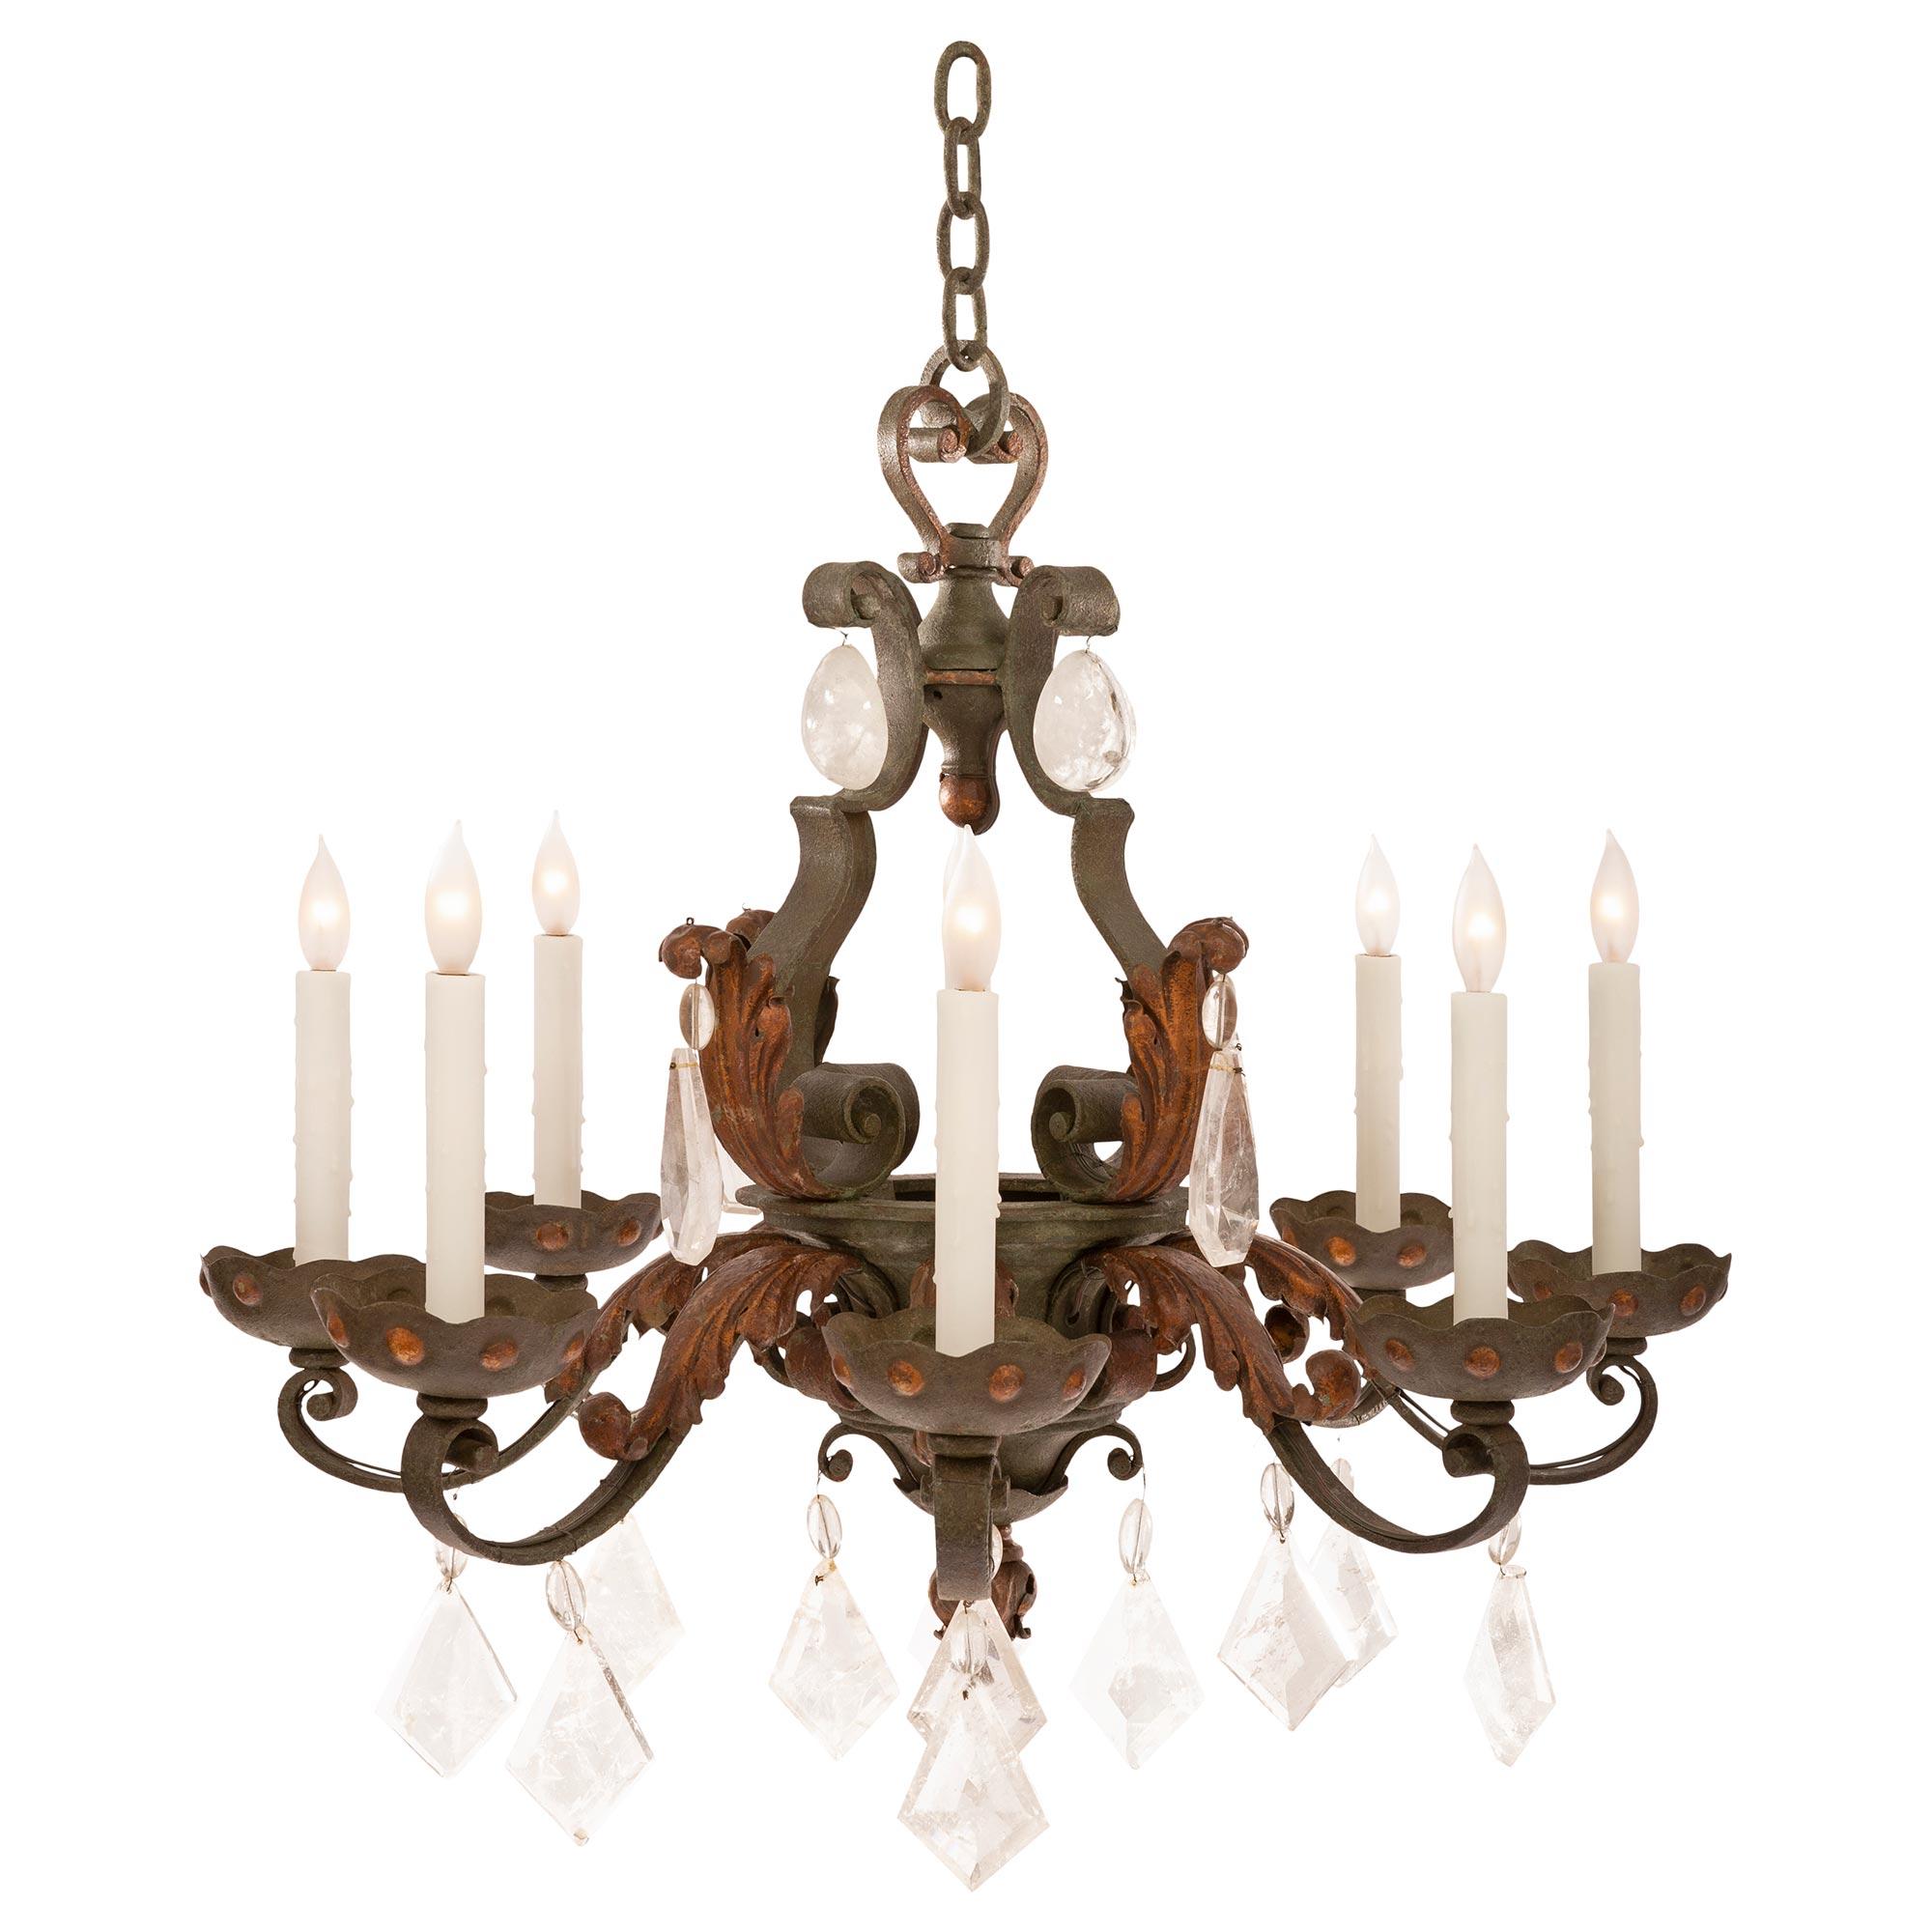 A beautiful Country French late 19th century Louis XV st. wrought iron and rock crystal chandelier. The eight arm chandelier is centered by a charming bottom foliate finial centered by a lovely array of most decorative kite shaped cut rock crystal